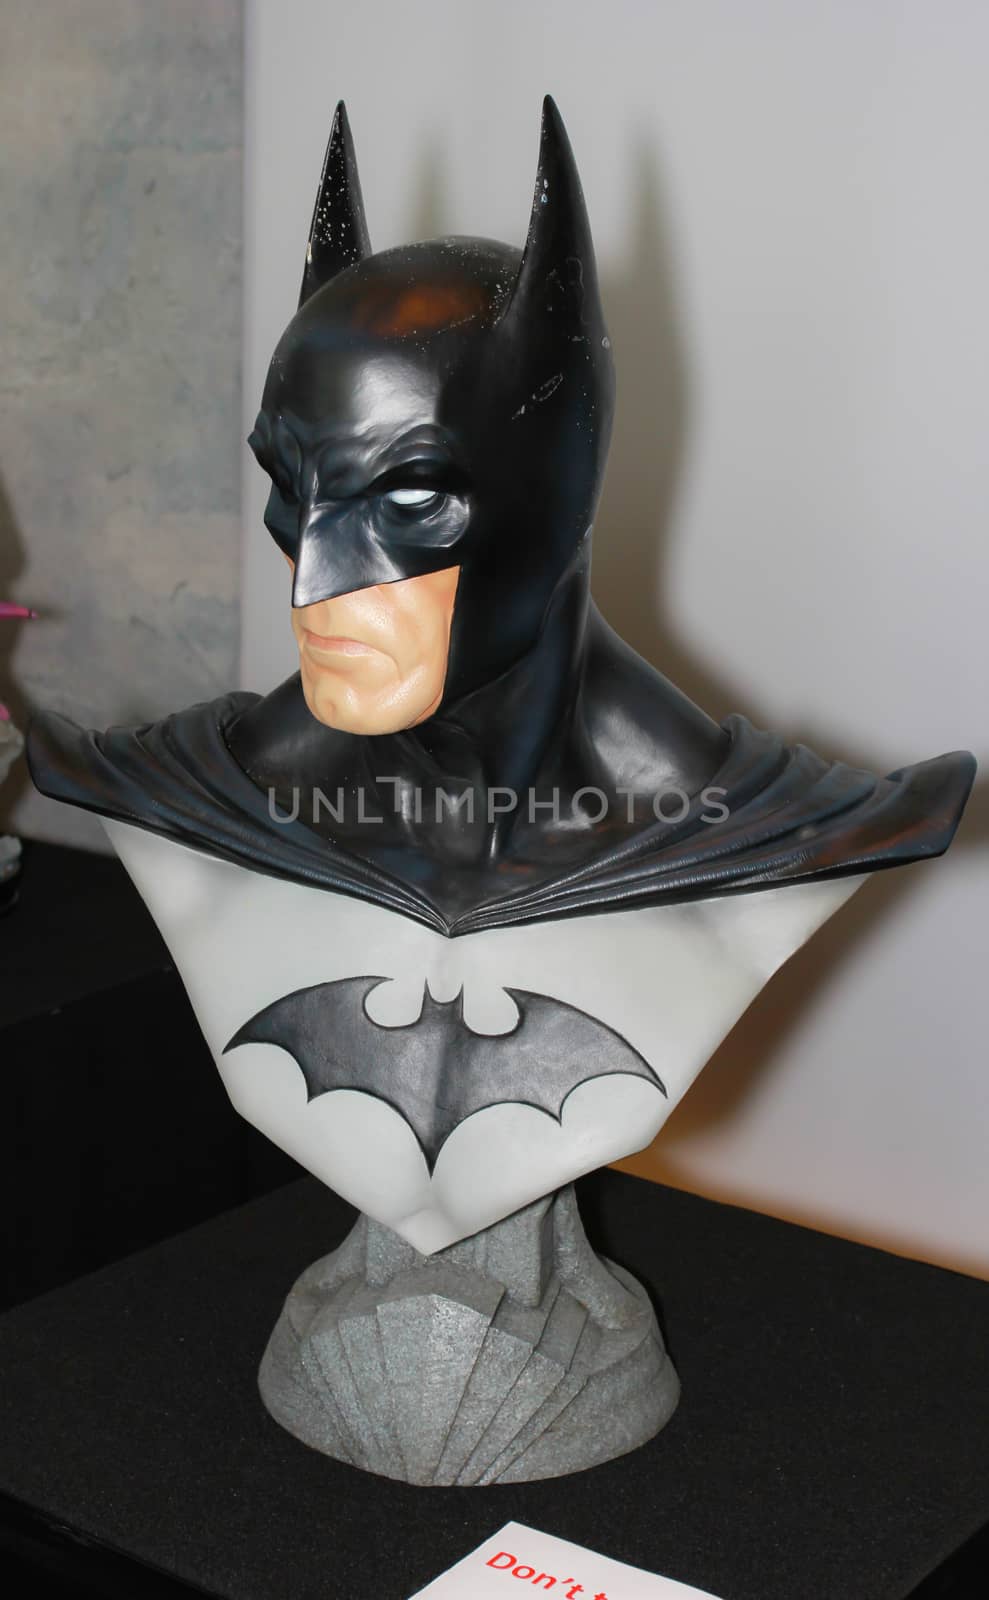 A model of the character Batman from the movies and comics 2 by redthirteen